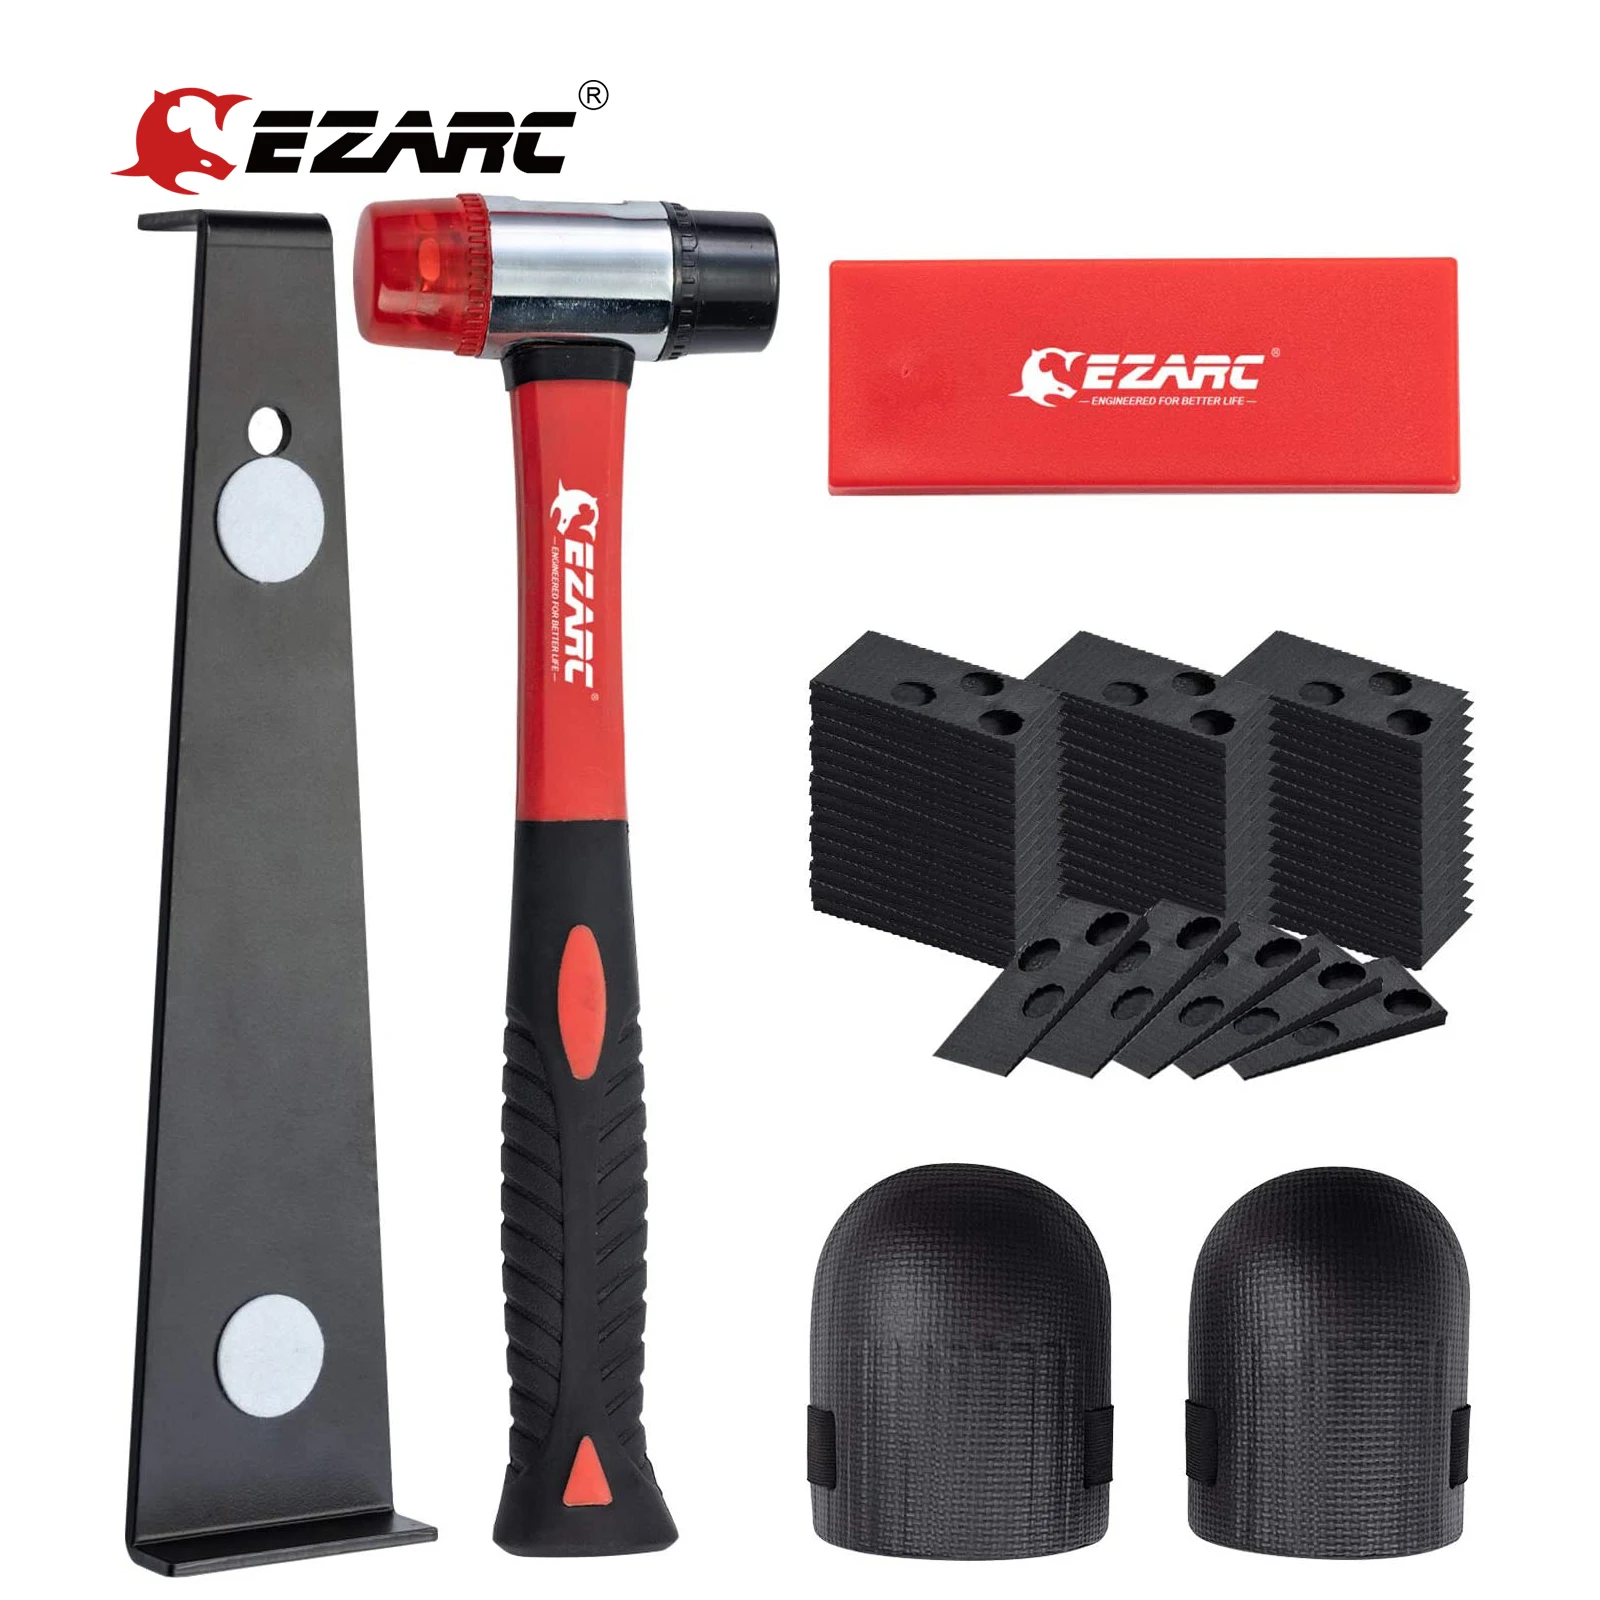 EZARC Laminate Wood Flooring Installation Kit with 60 Spacers,Pull Bar, Rubber Tapping Block, Double-Faced Mallet, Foam Kneepads flooring spacers laminate wood flooring tools compatible w vinyl plank hardwood